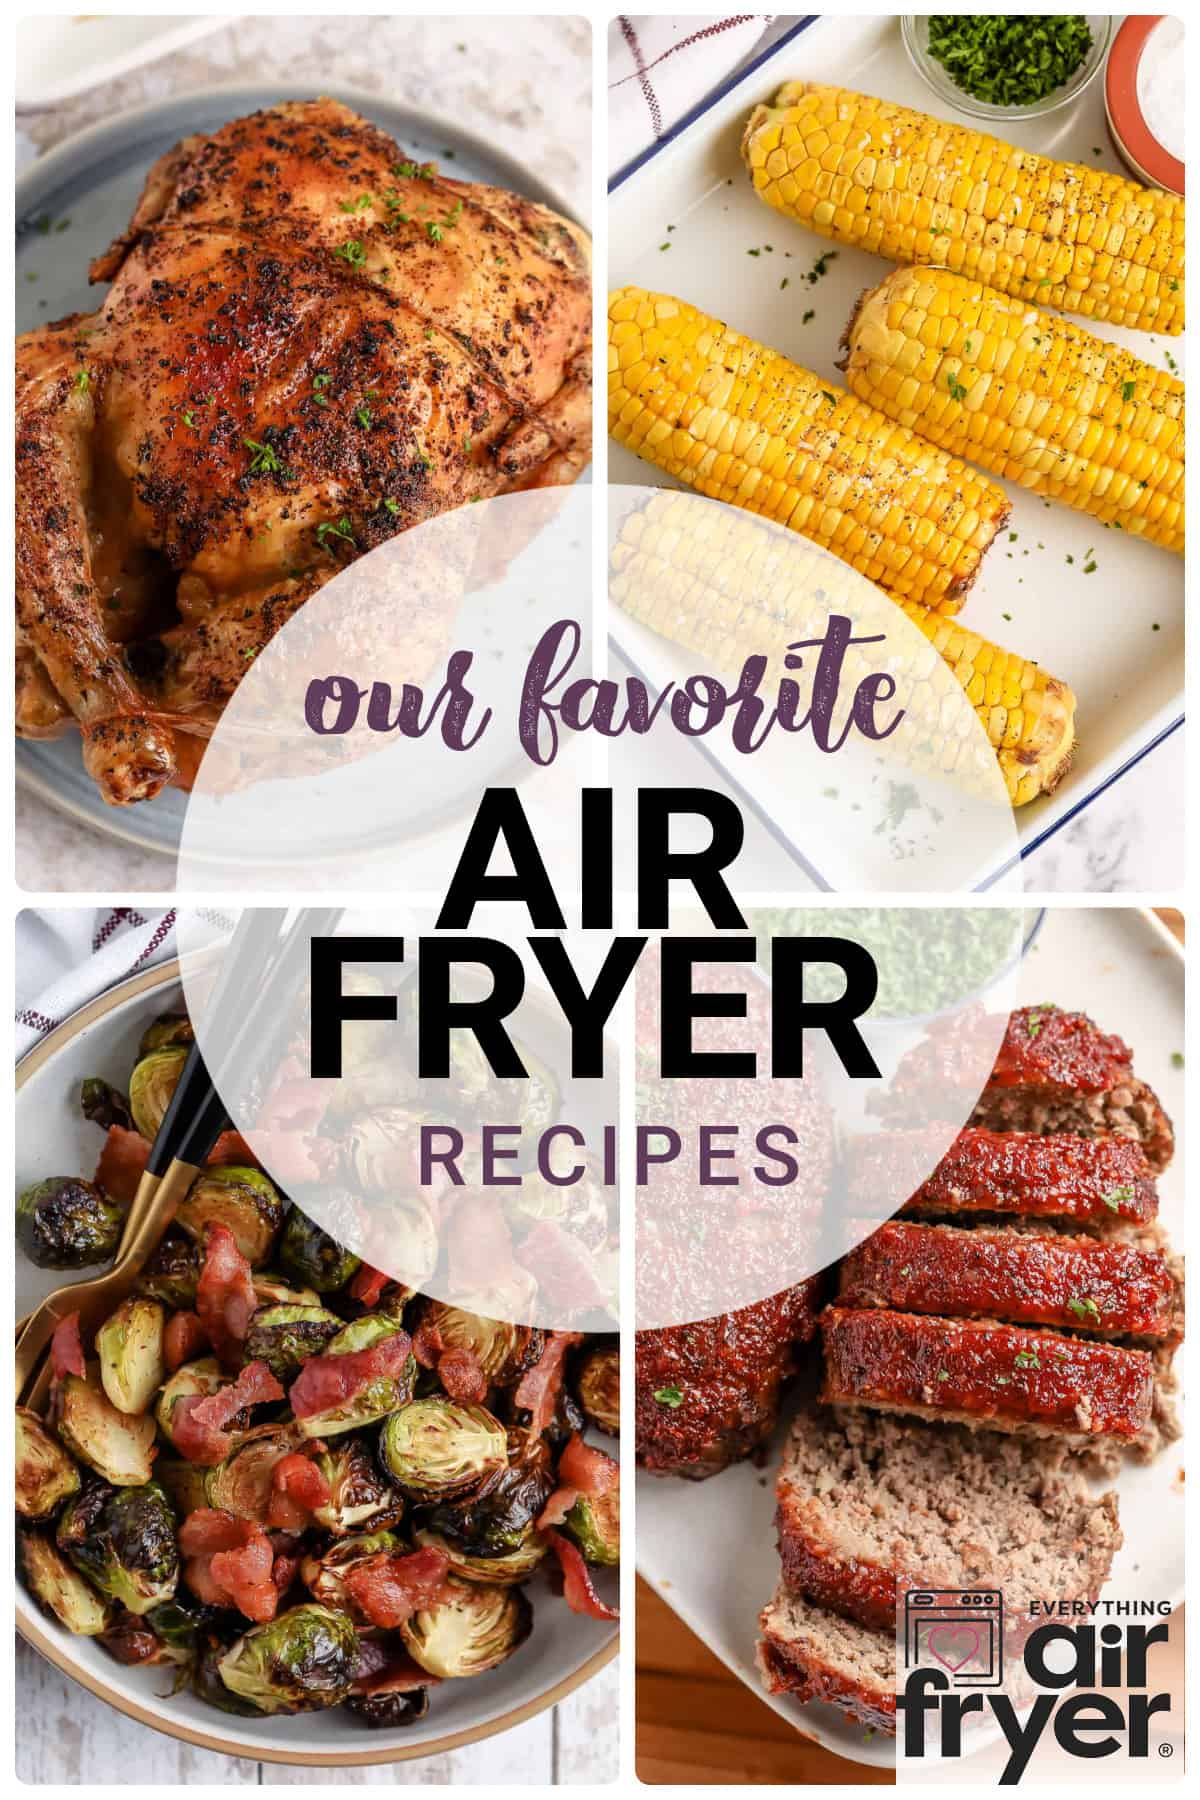 For the best air fryer recipes, these favorites do it all, from main meals to appetizers, and desserts! It's easy to cook or reheat all kinds of food in the air fryer, from chicken wings to whole chicken! Tasty fried food is made healthy with less oil and easy cleanup. For perfect results every time use the air fryer instead of the oven! #bestairfryerrecipes #dessertrecipesairfryer #airfryermeals #everythingairfryer 